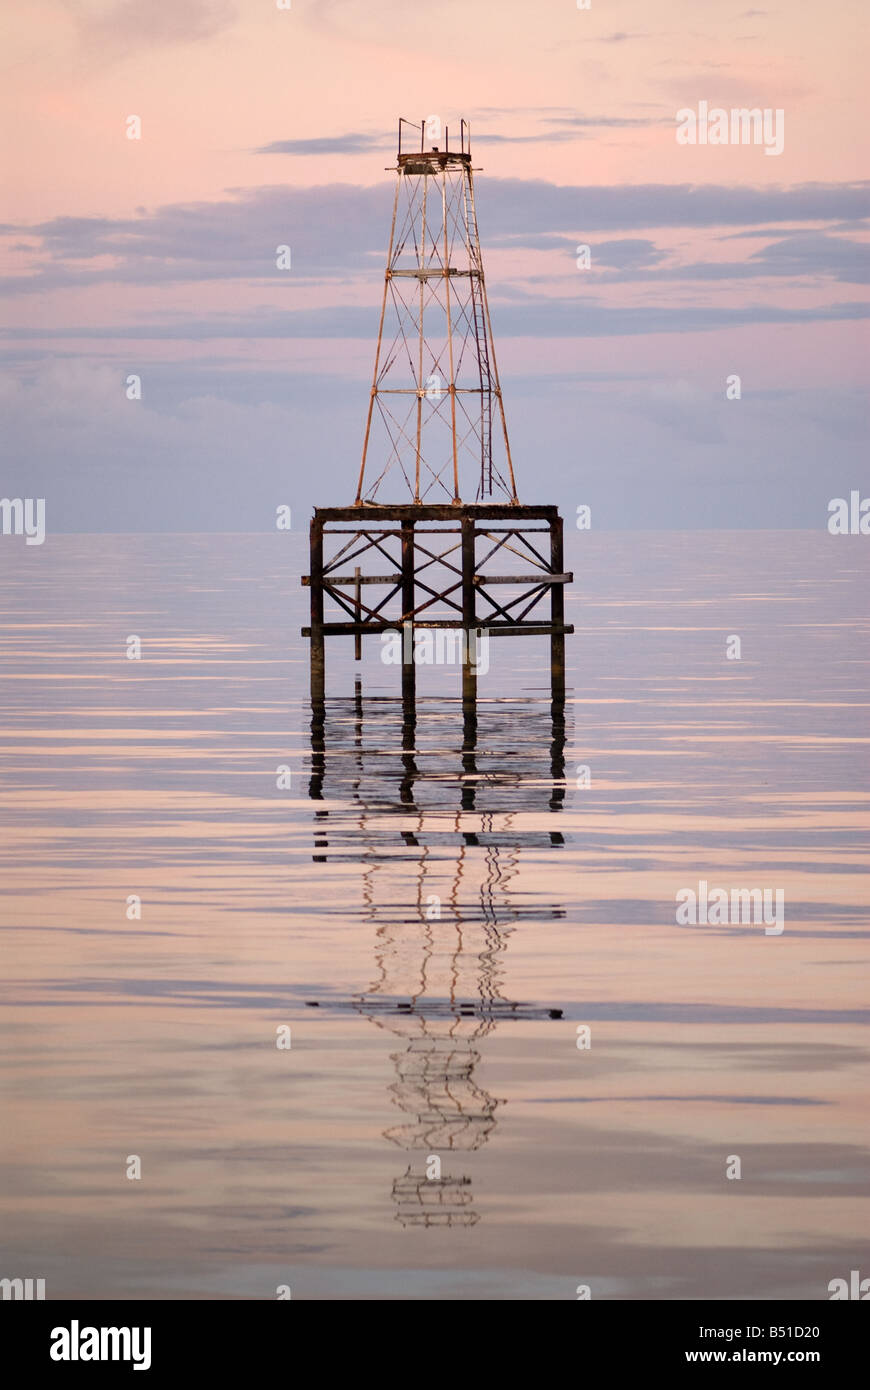 Decca Tower At Dawn in the Bahamas Stock Photo